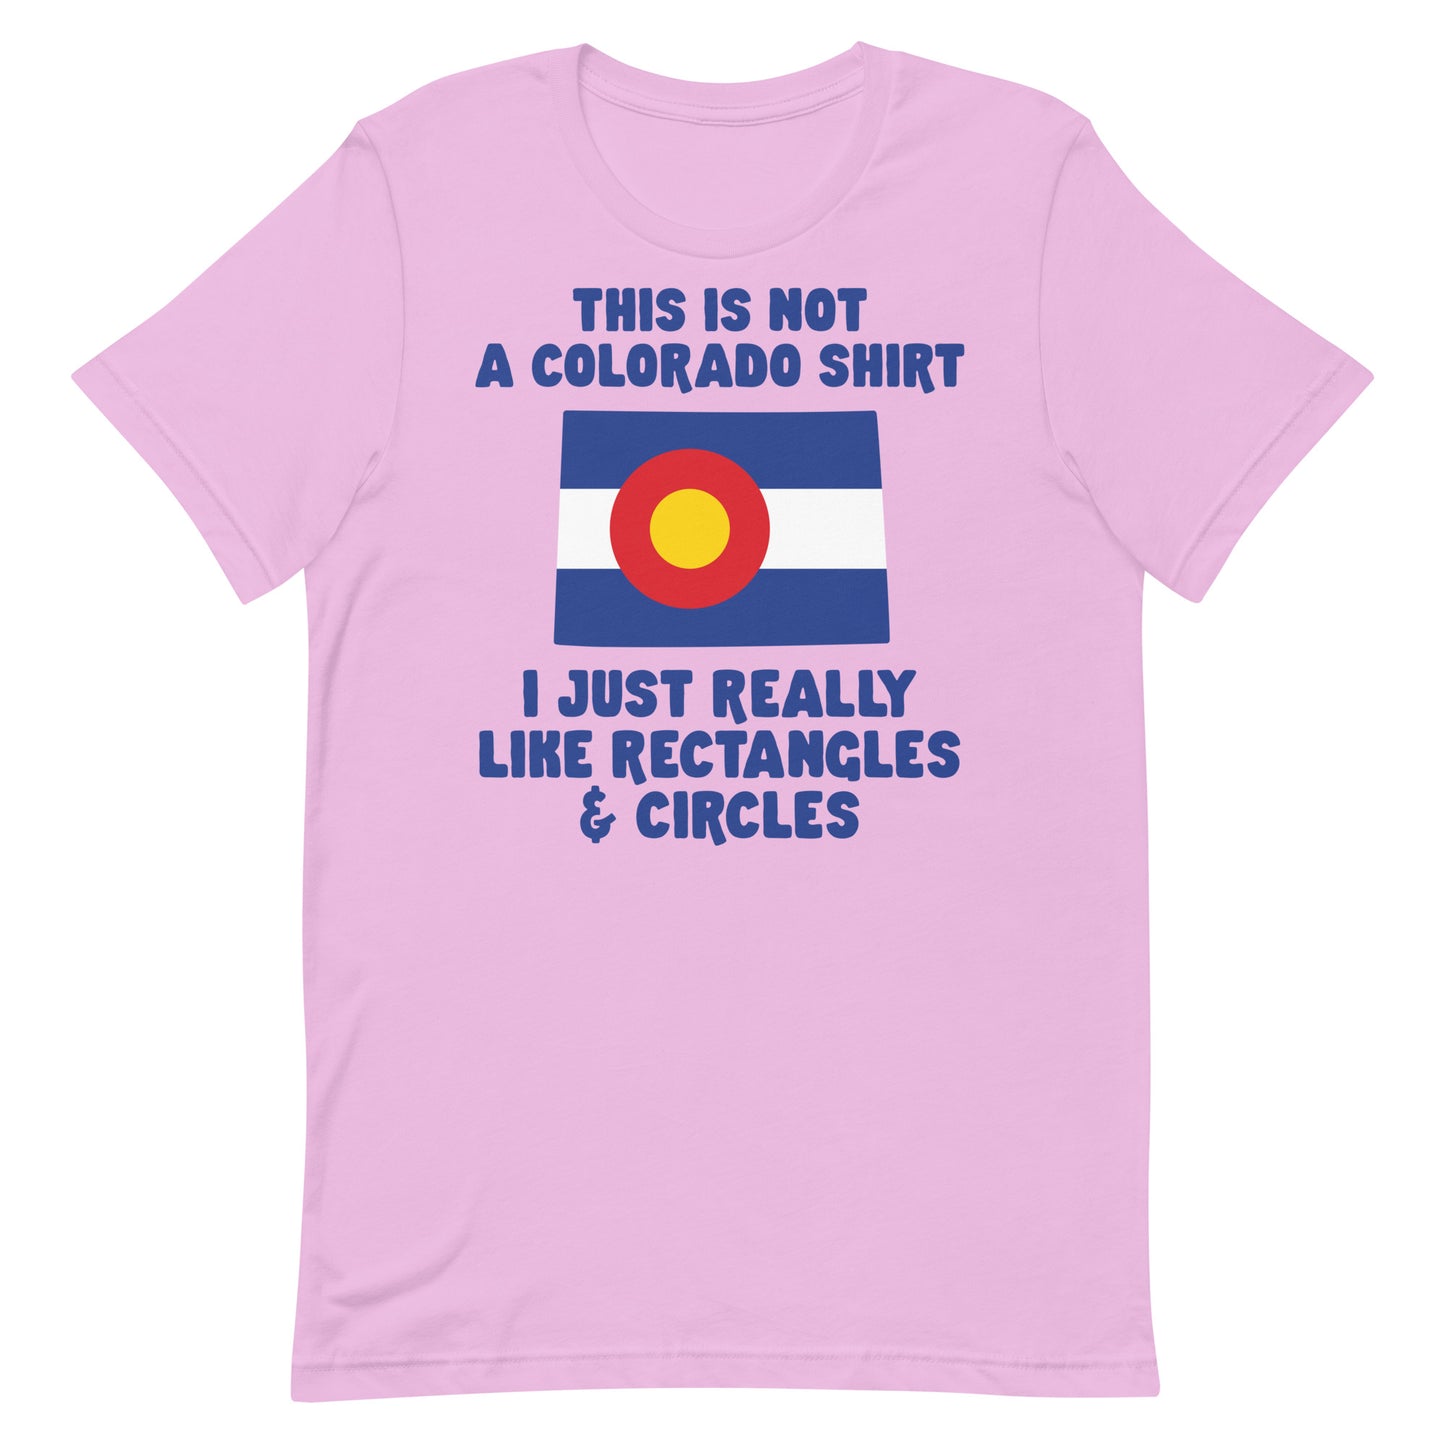 This is Not a Colorado Shirt Unisex t-shirt